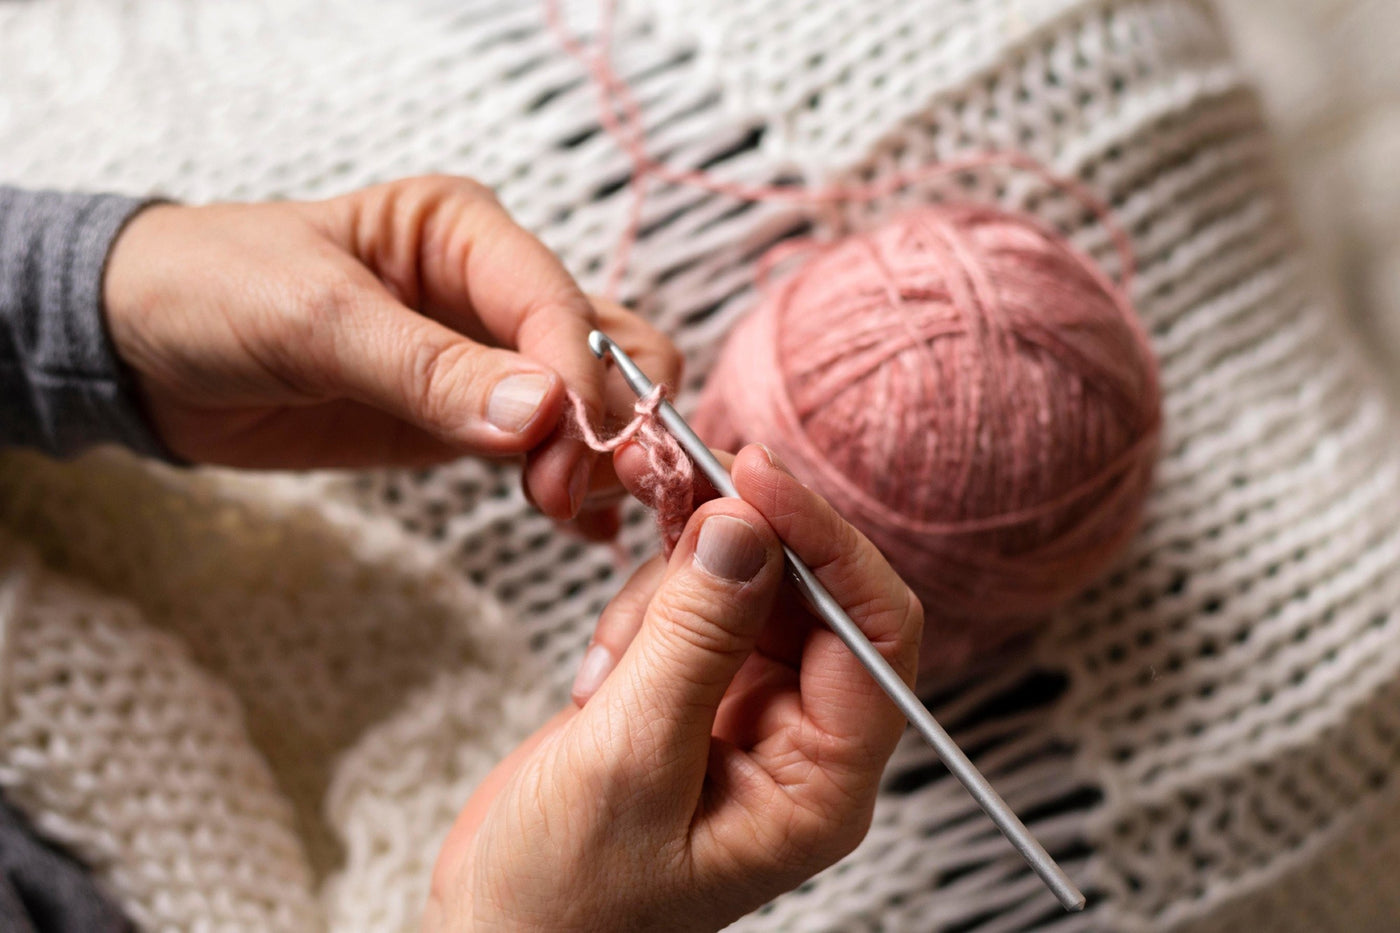 Crochet Mistakes you need to avoid